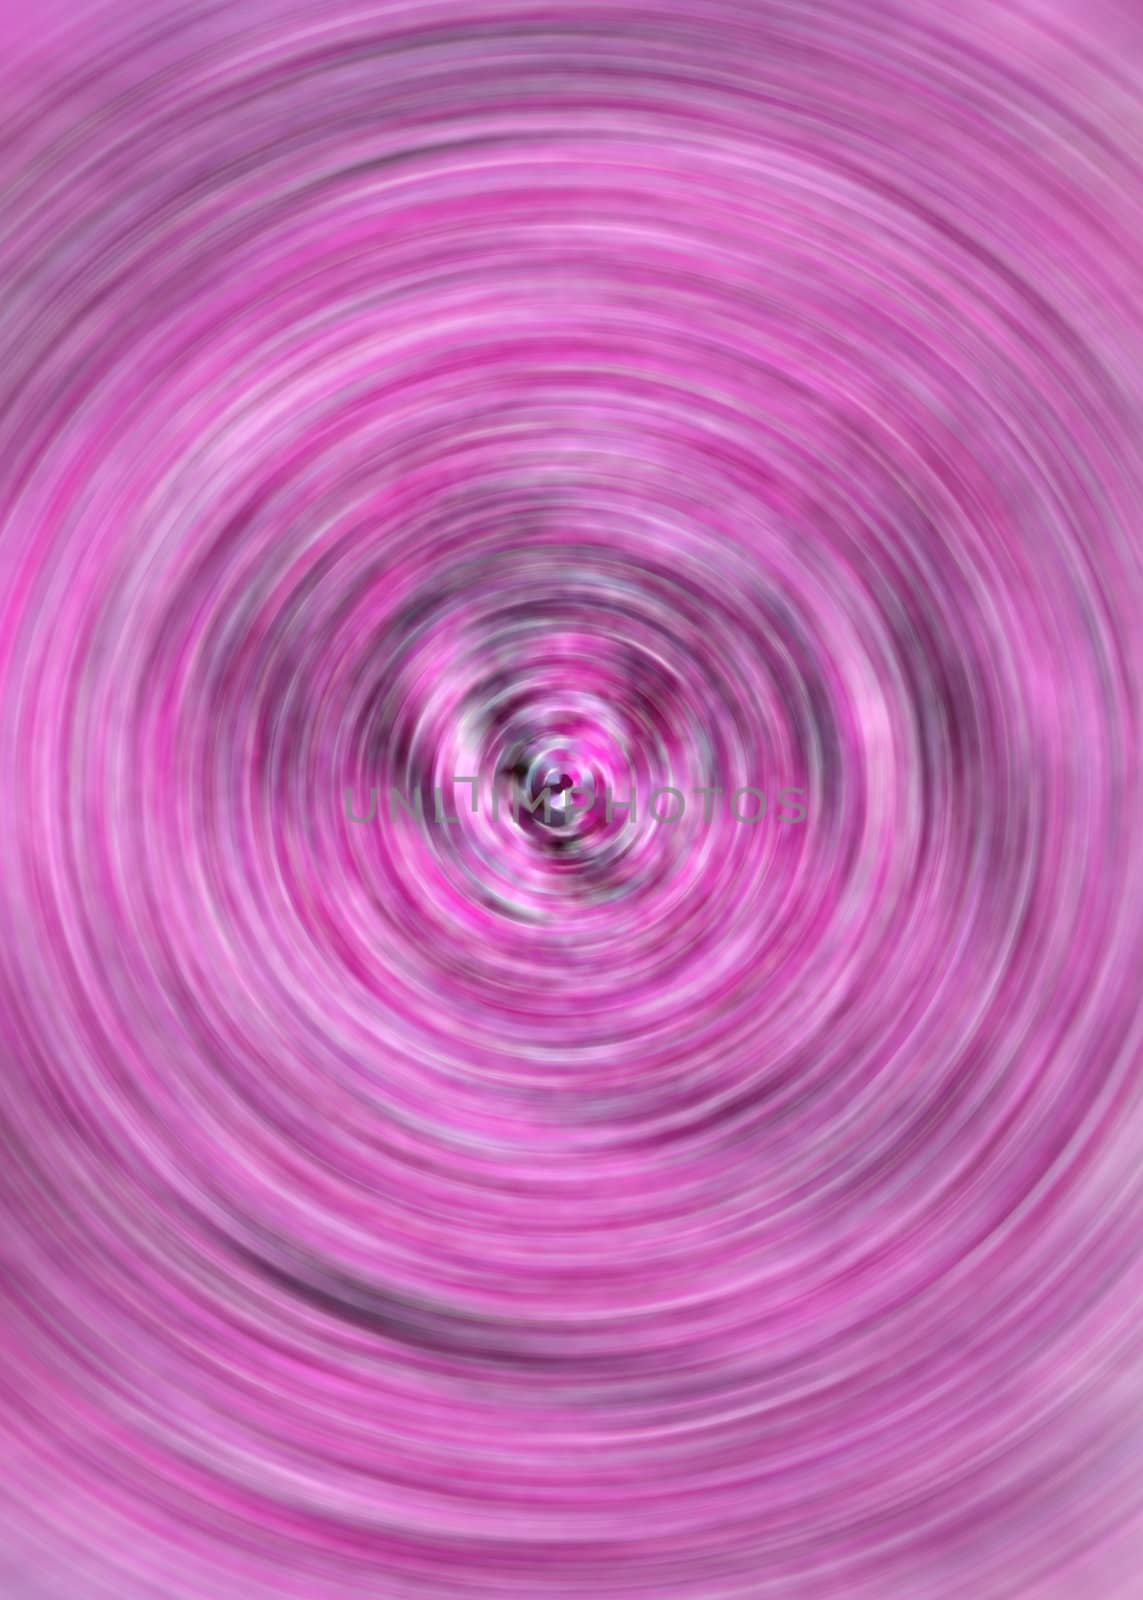 Pink and purple tunnel perspective illustration by ftlaudgirl